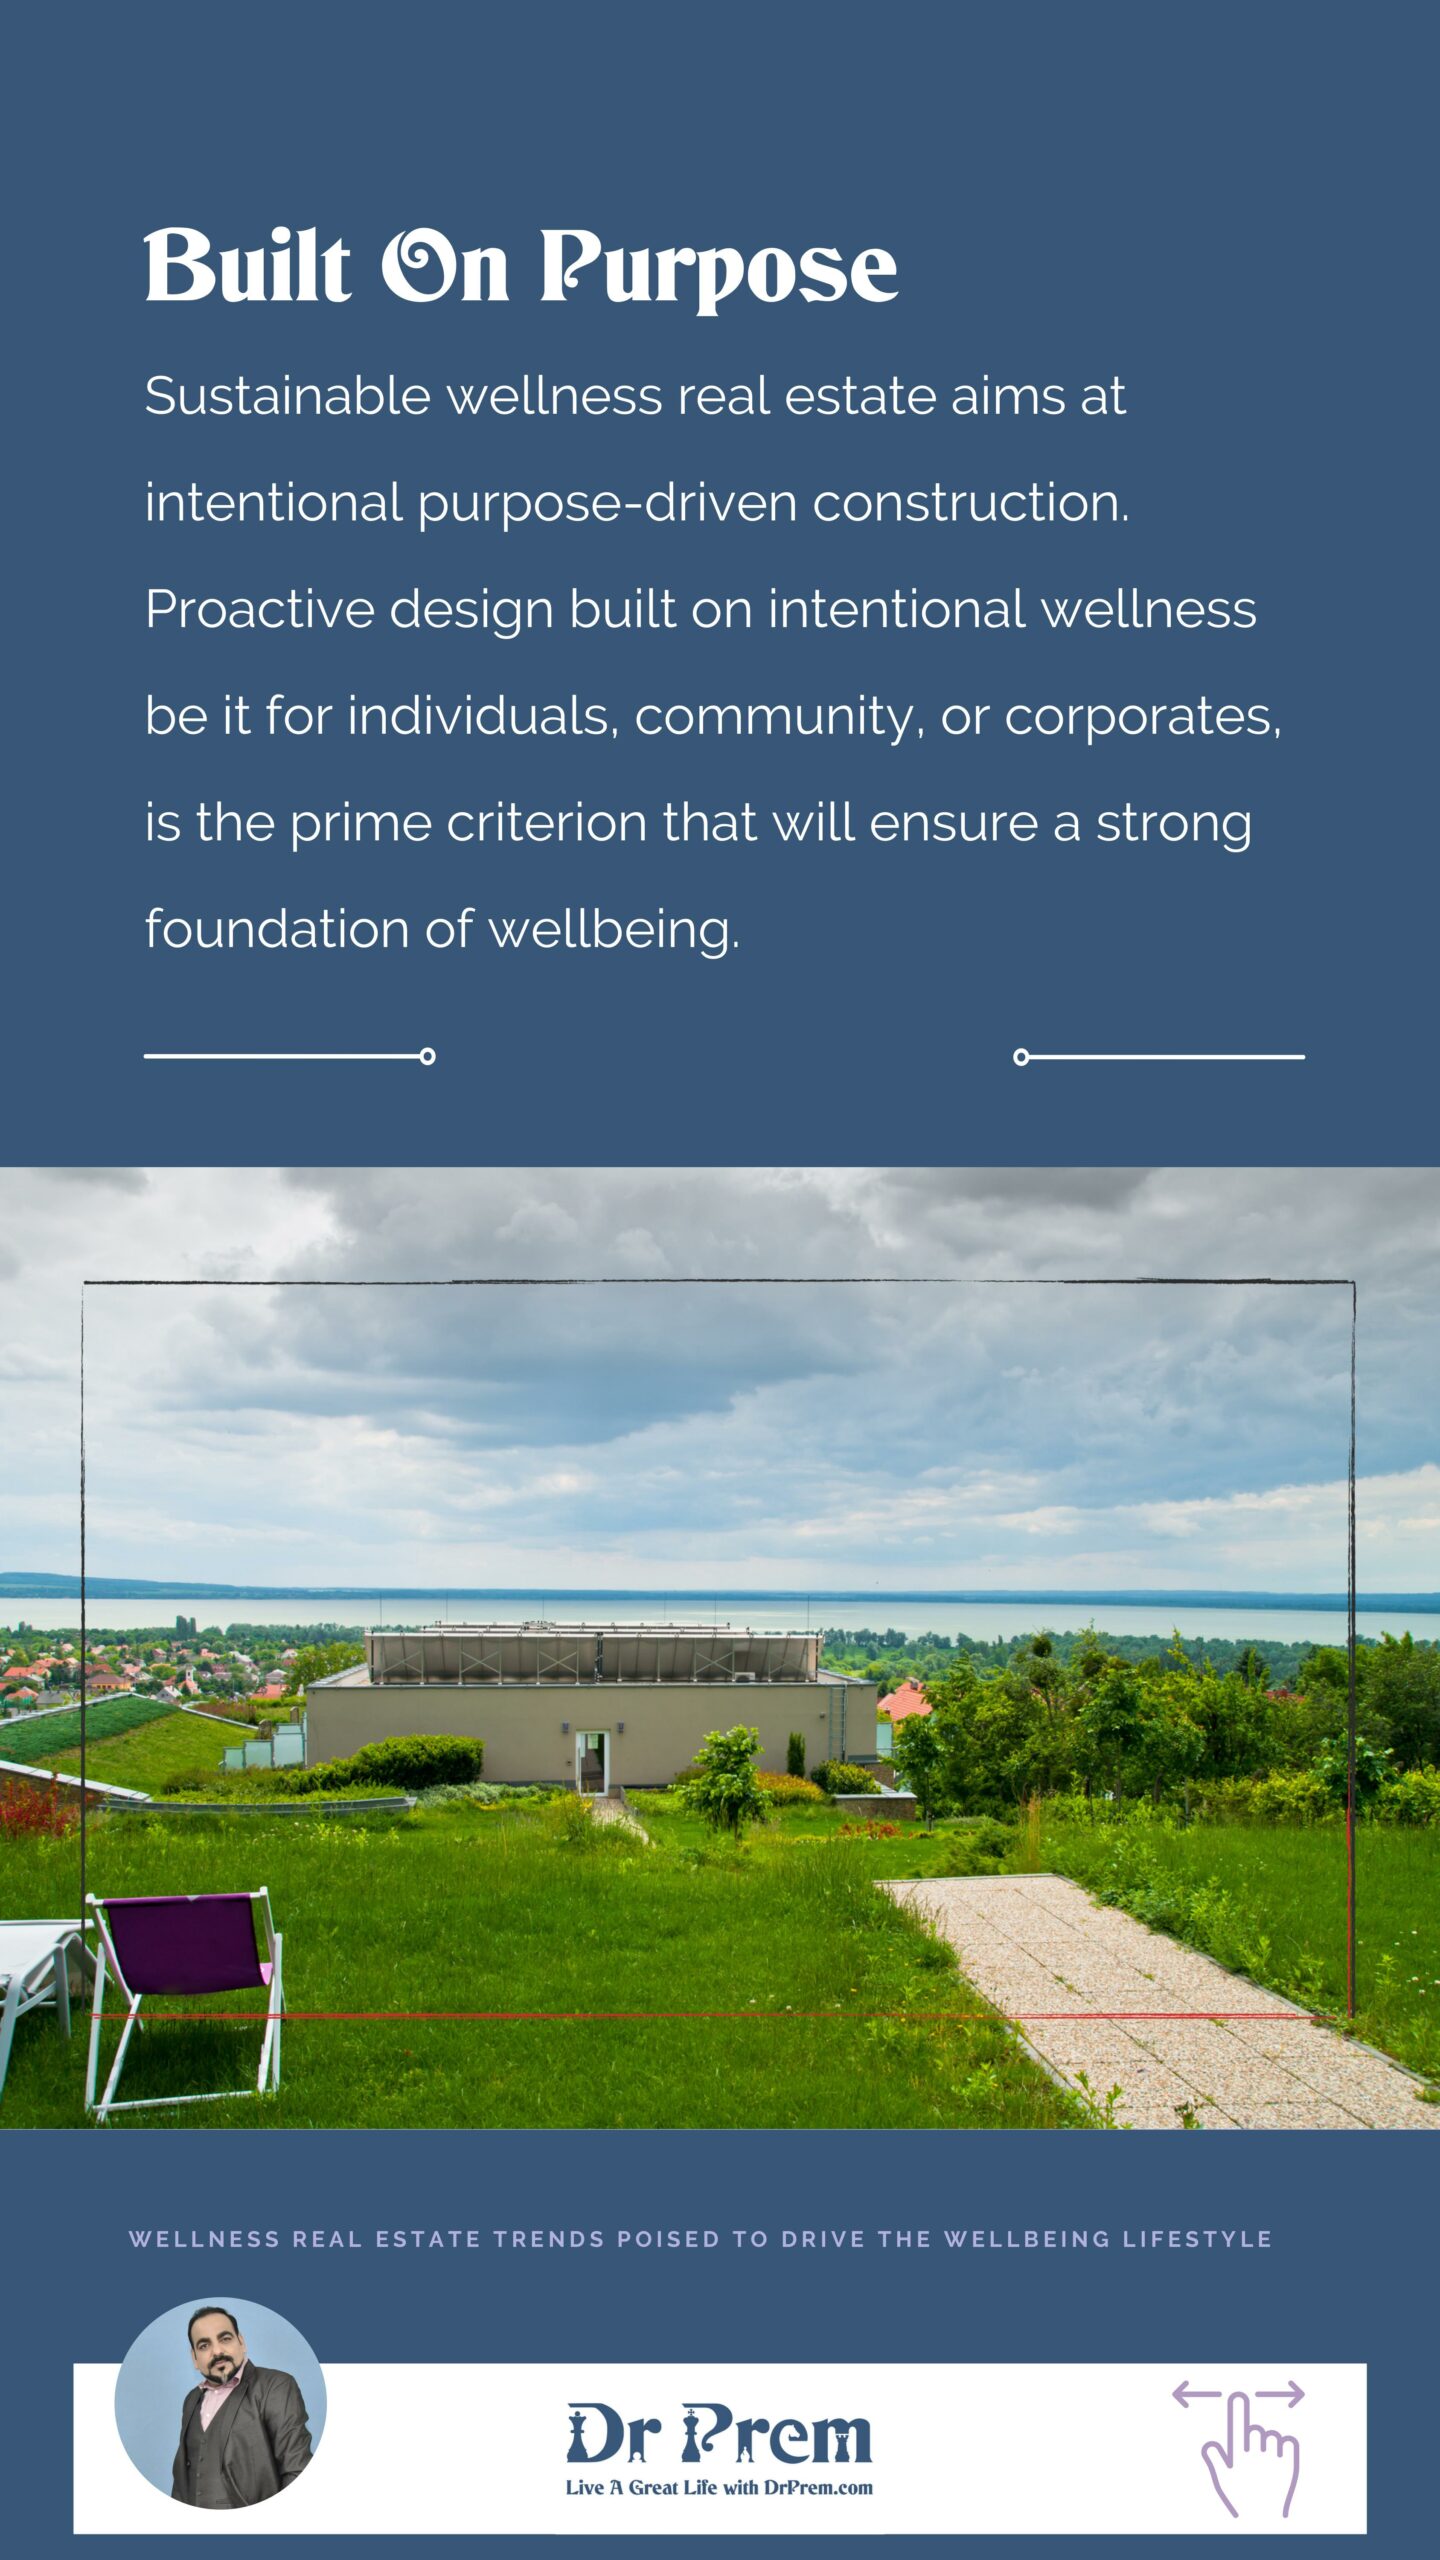 Wellness Real Estate Trends Poised To Drive The Well-Being Lifestyle 2